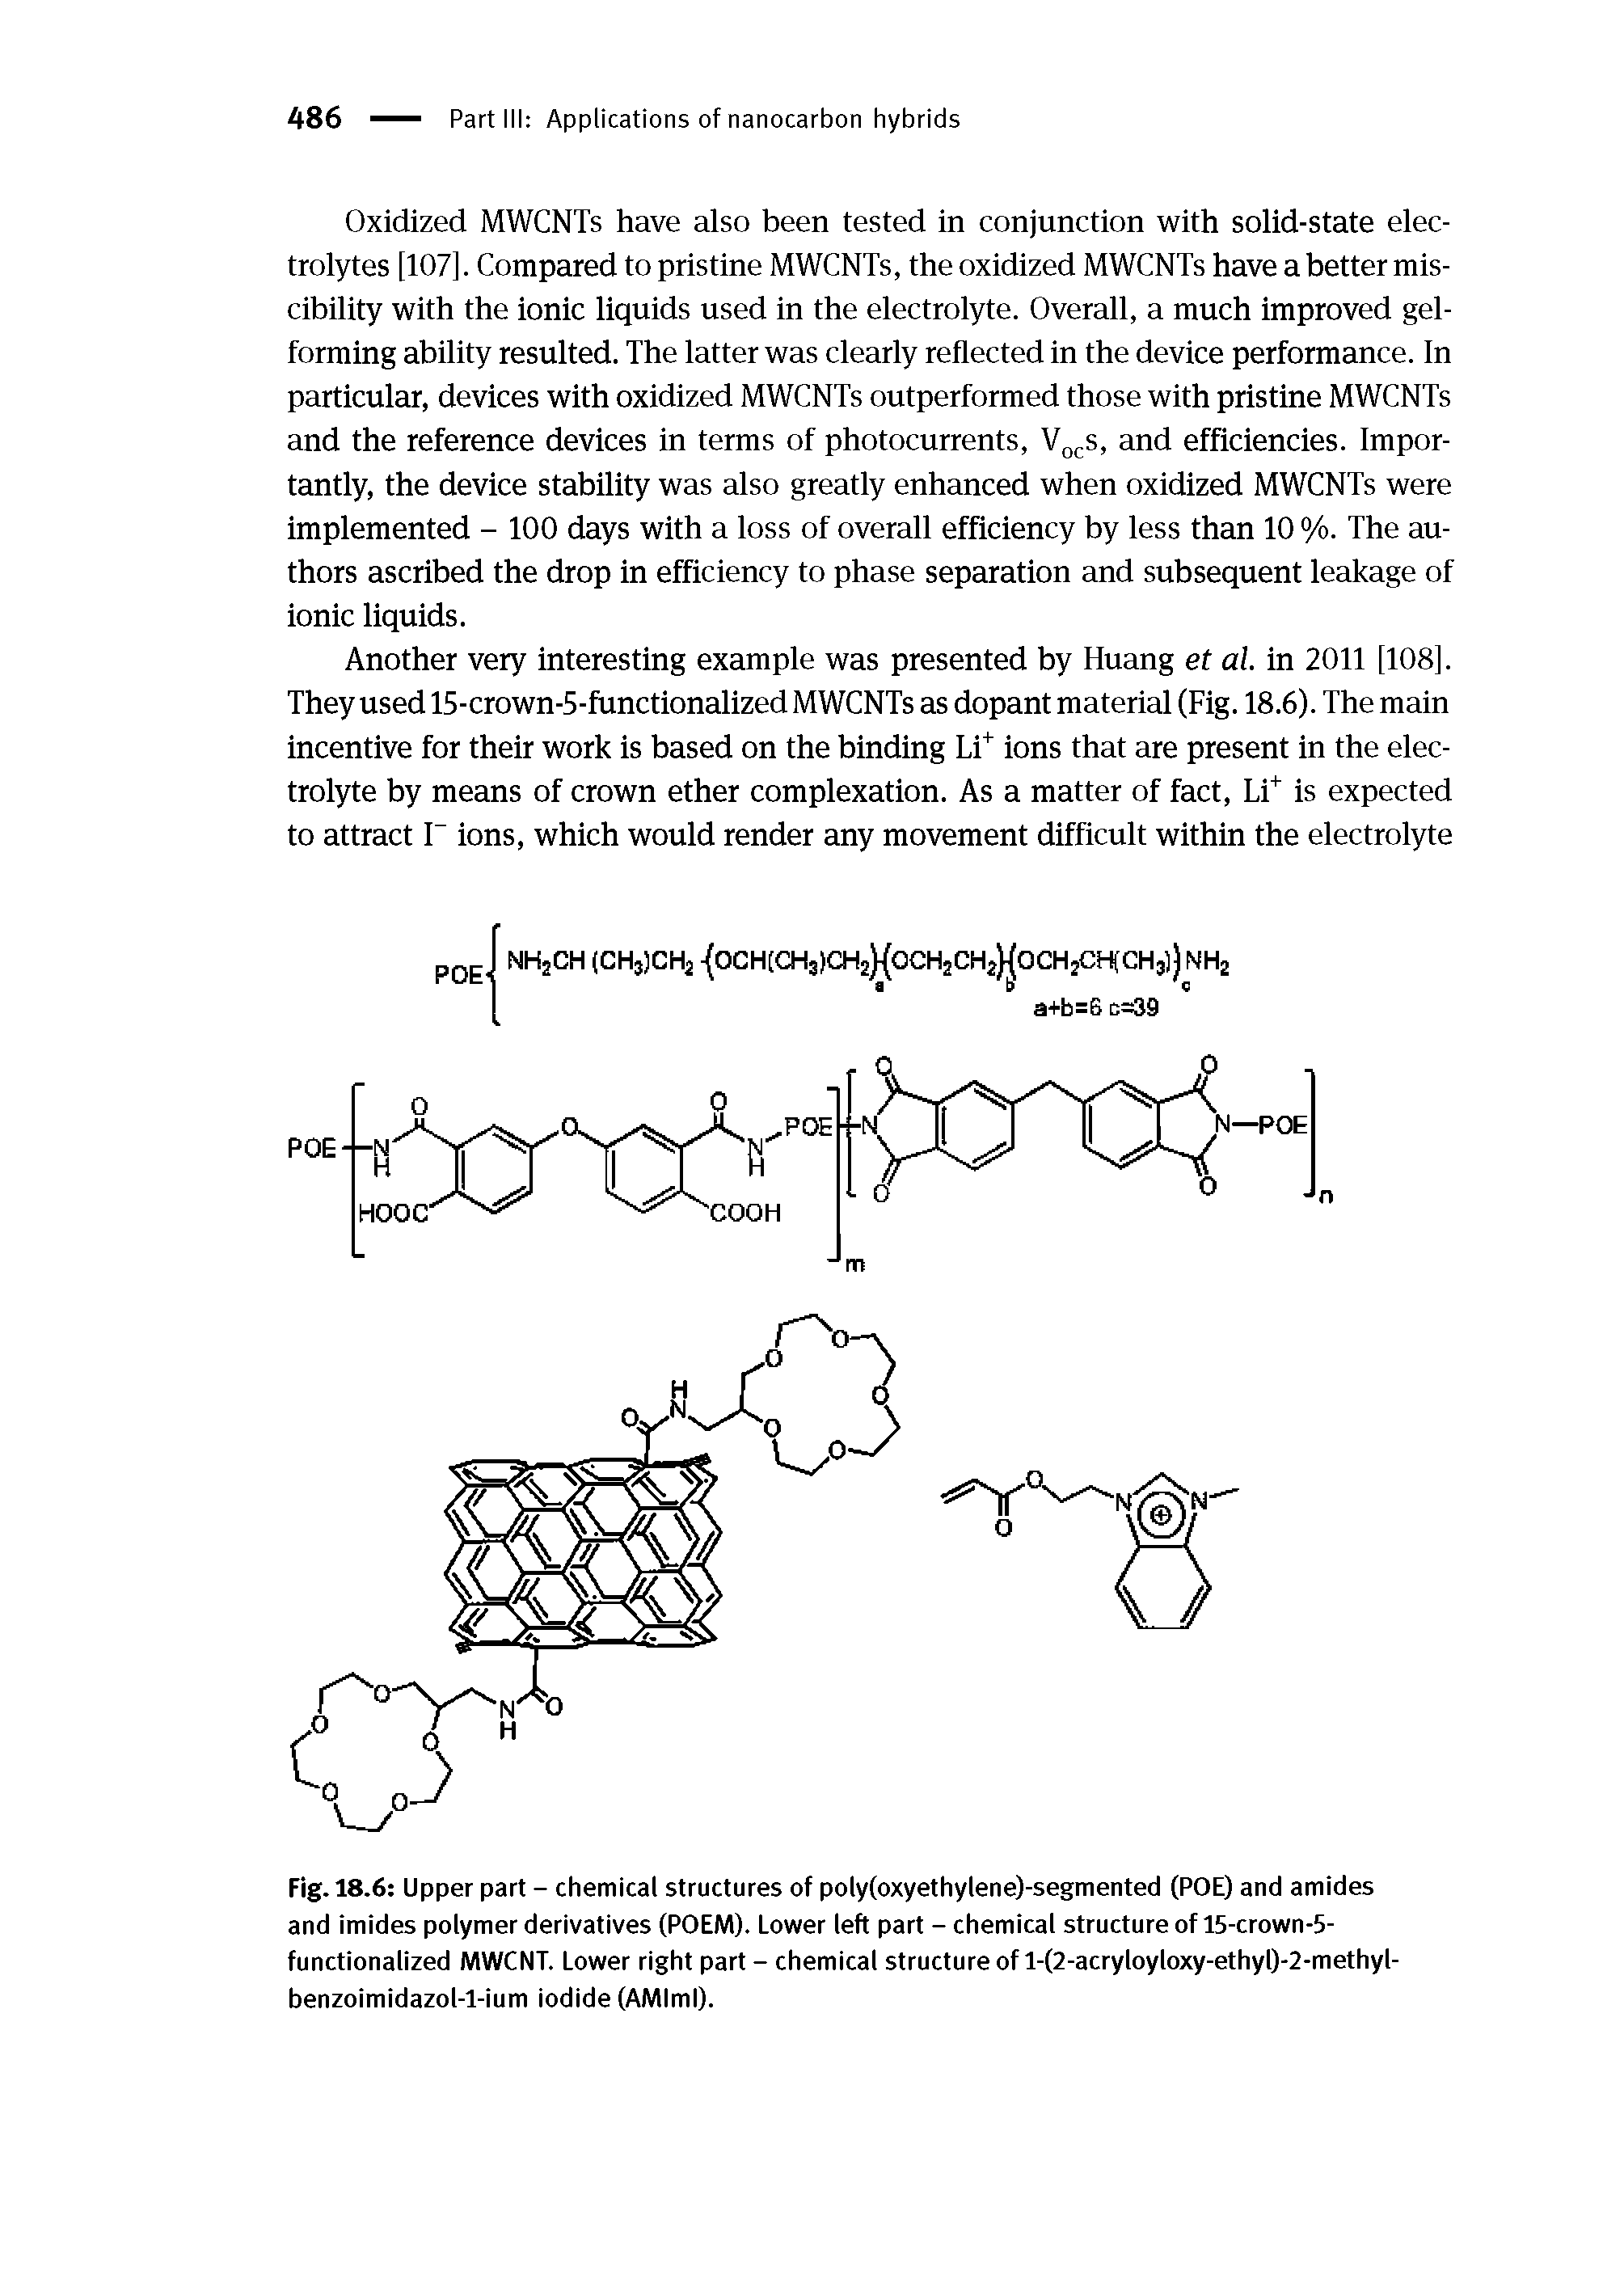 Fig. 18.6 Upper part - chemical structures of poly(oxyethylene)-segmented (POE) and amides and imides polymer derivatives (POEM). Lower left part - chemical structure of 15-crown-5-functionalized MWCNT. Lower right part - chemical structure of l-(2-acryloyloxy-ethyl)-2-methyl-benzoimidazol-l-ium iodide (AMIml).